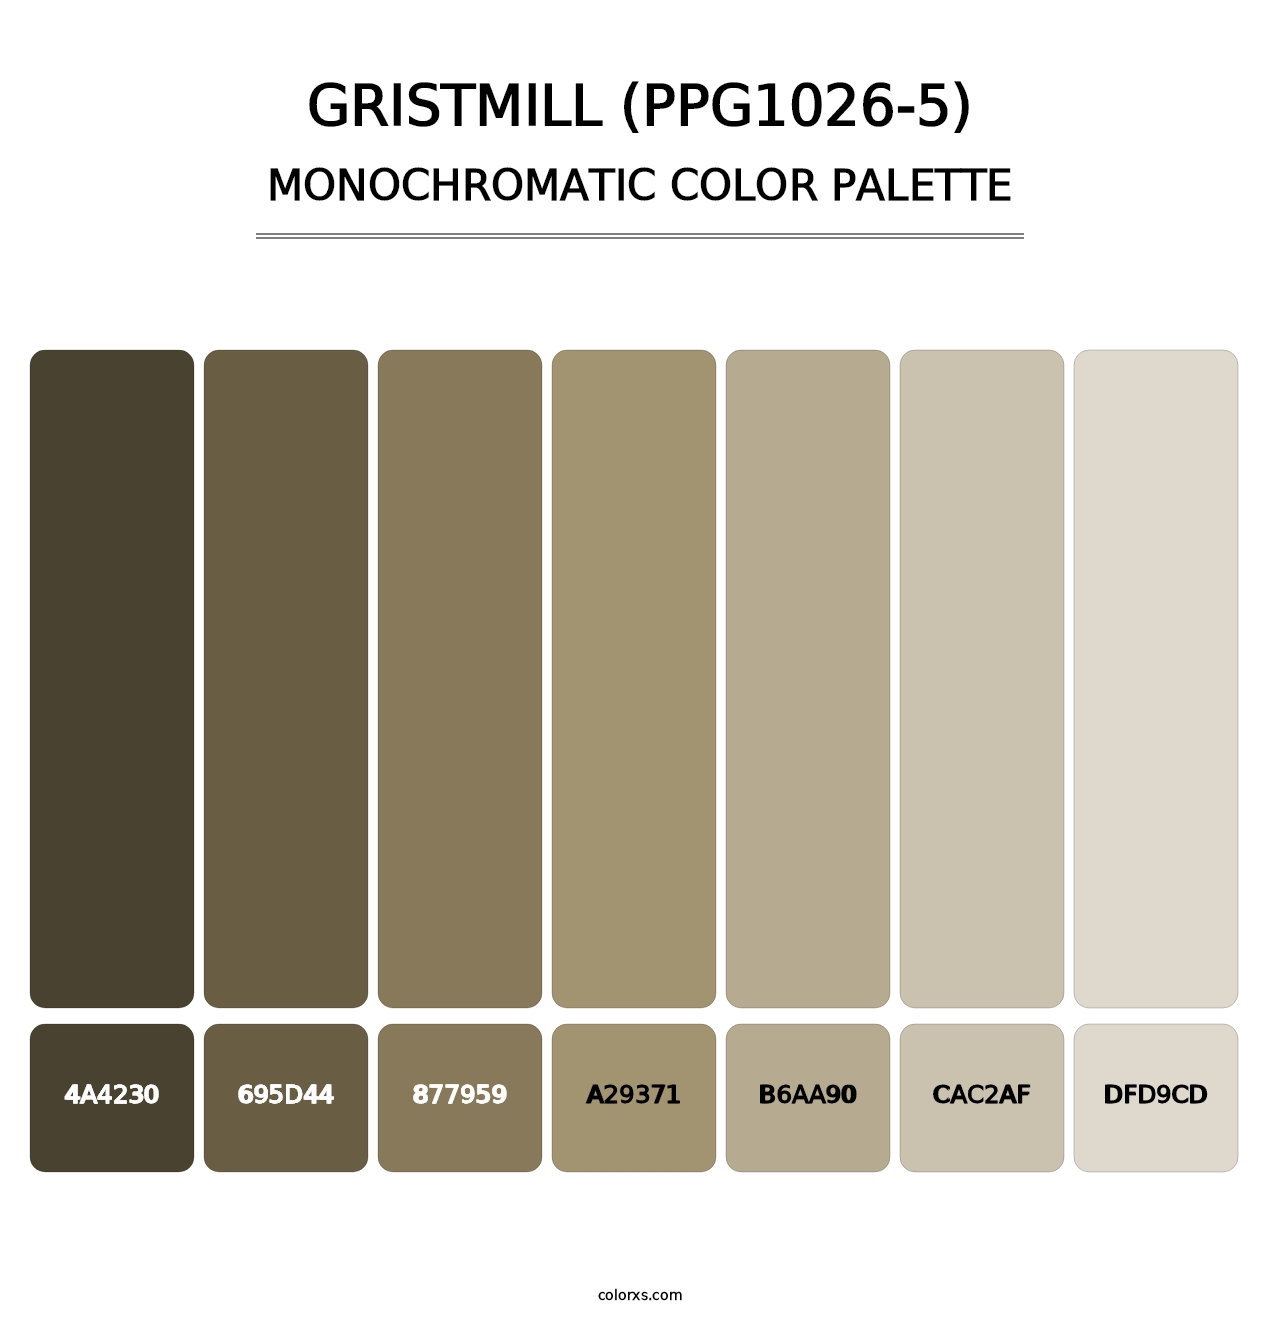 Gristmill (PPG1026-5) - Monochromatic Color Palette